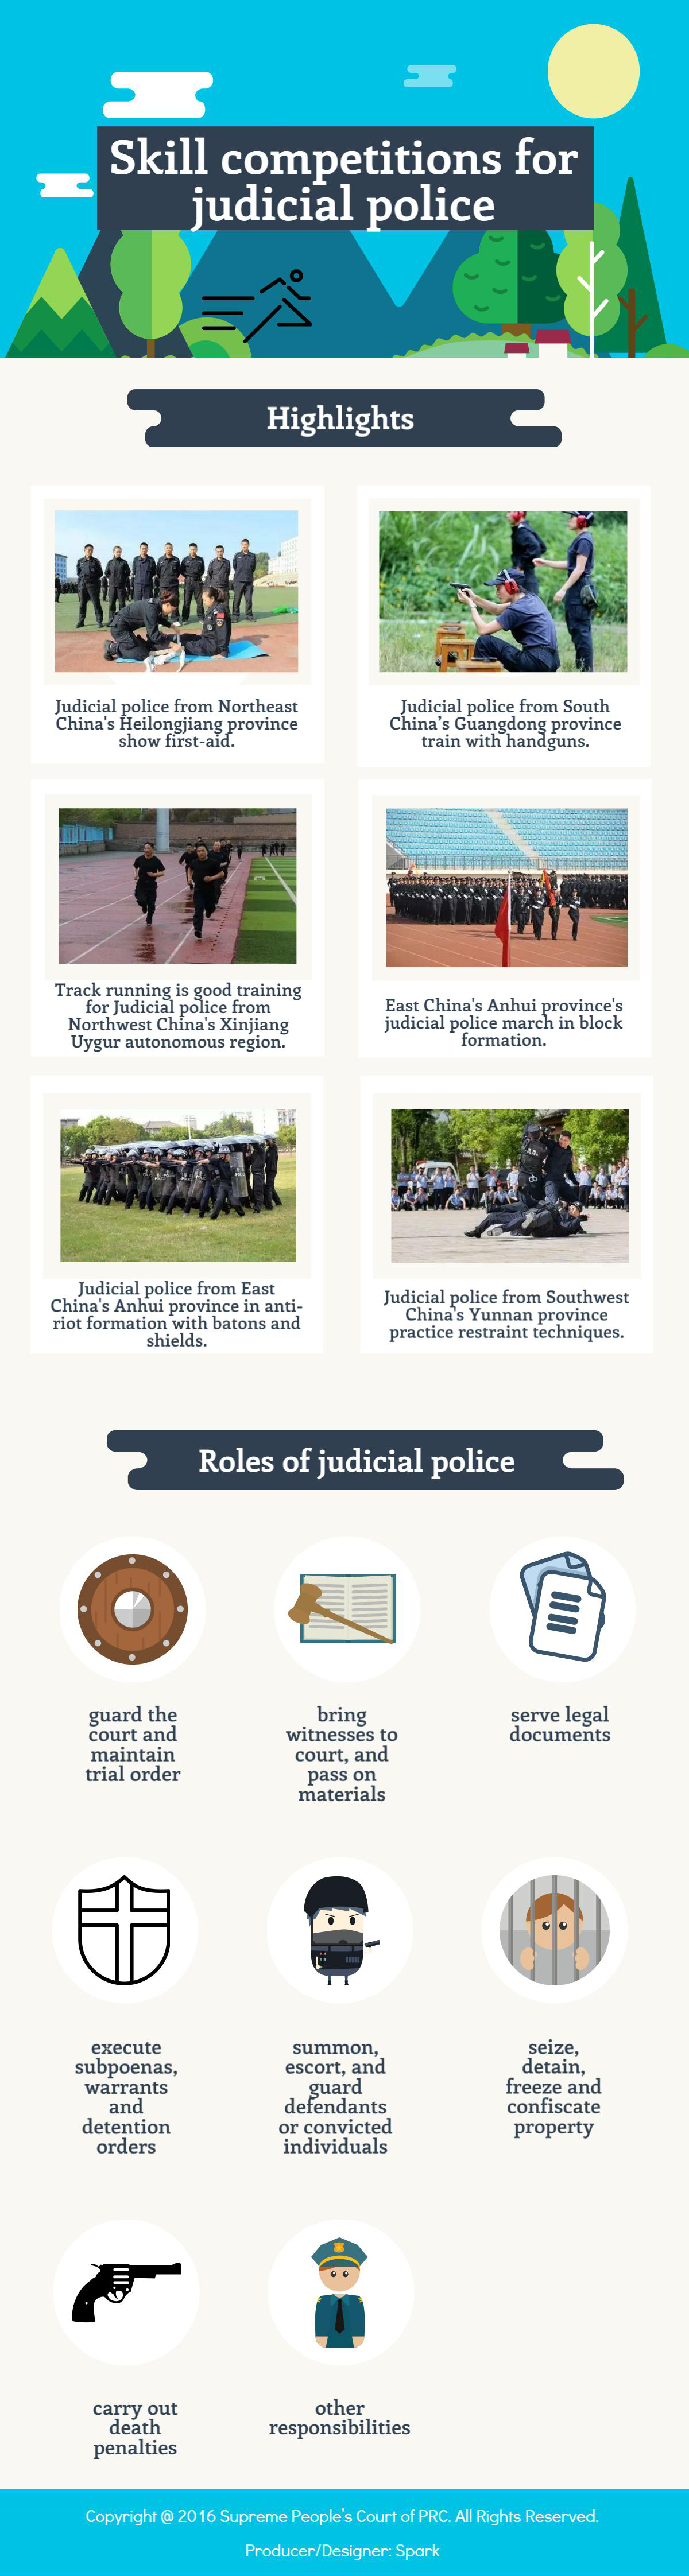 Skill competitions for judicial police